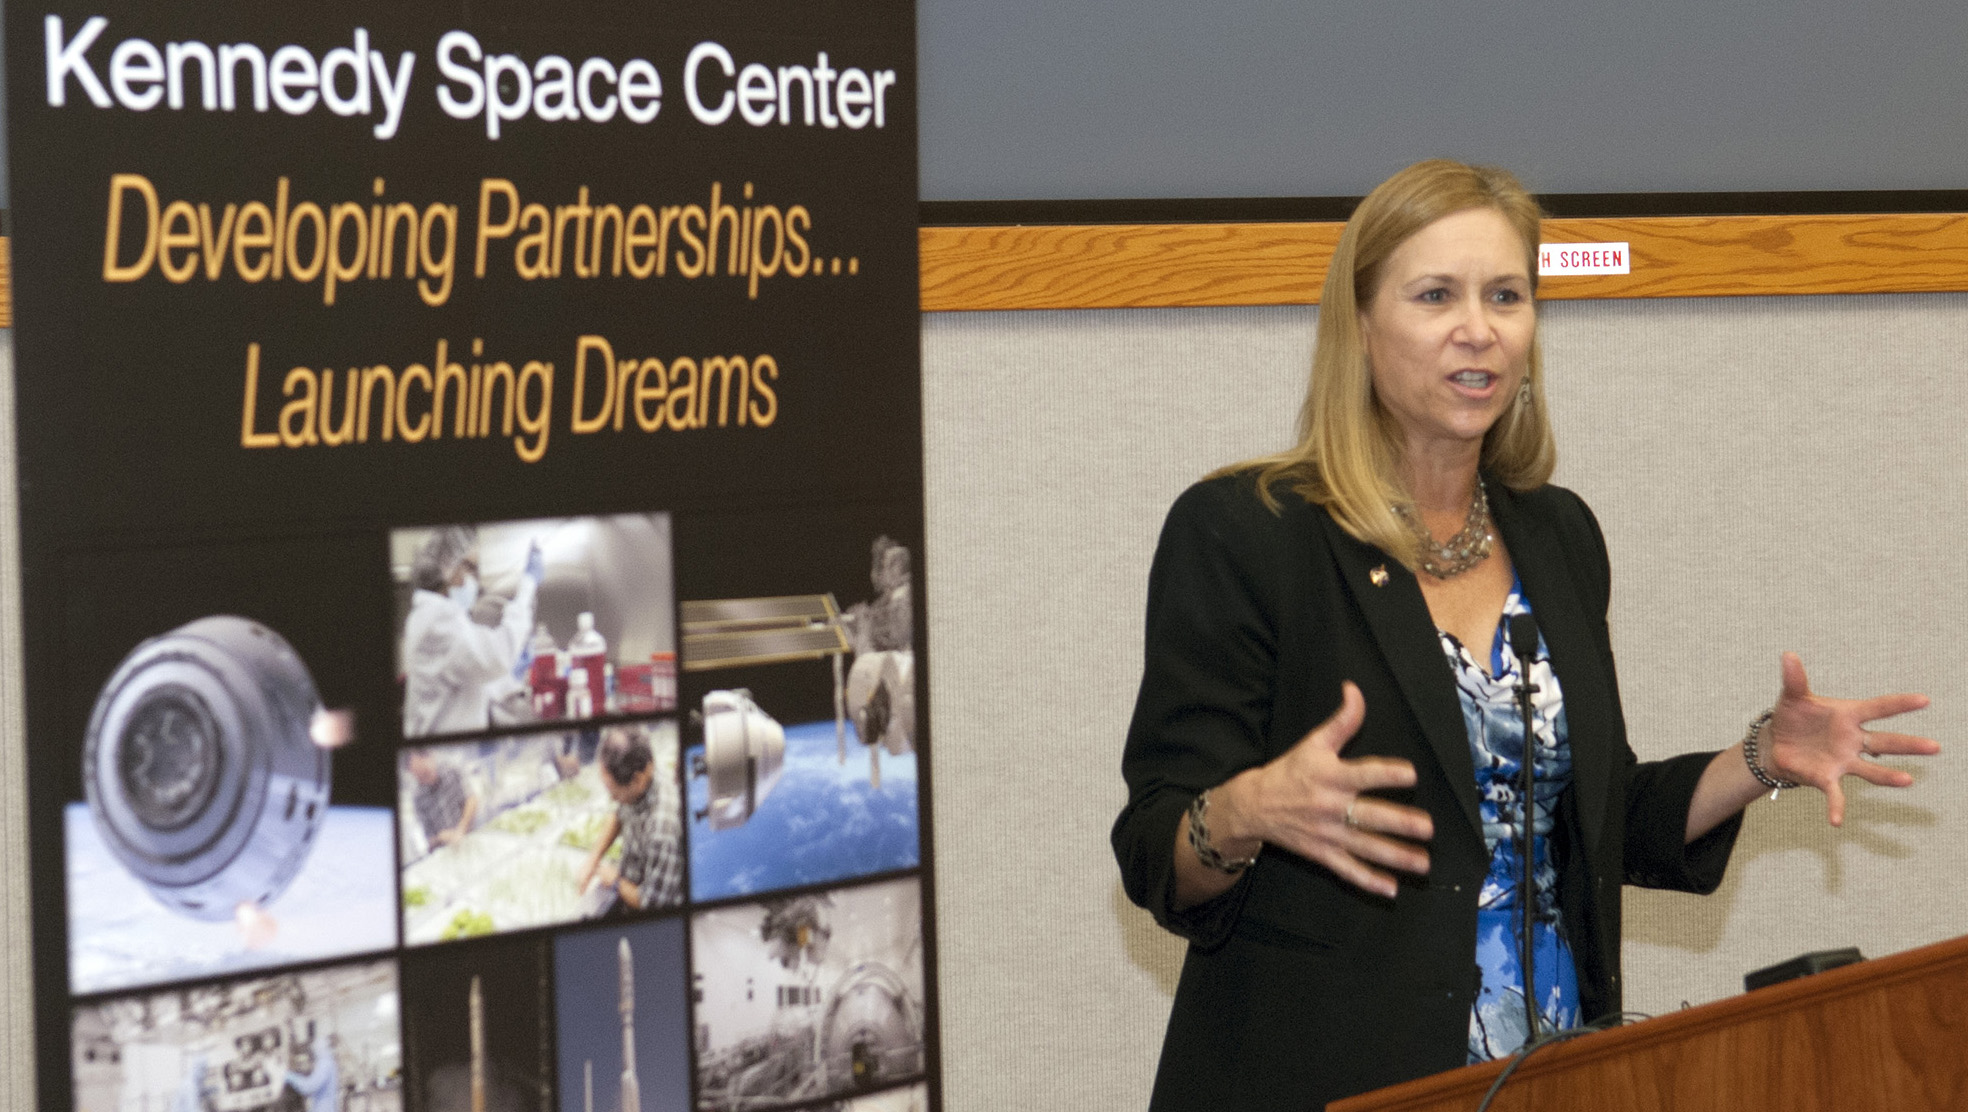 Janet Petro addresses the workforce at Kennedy Space Center during an innovation expo.